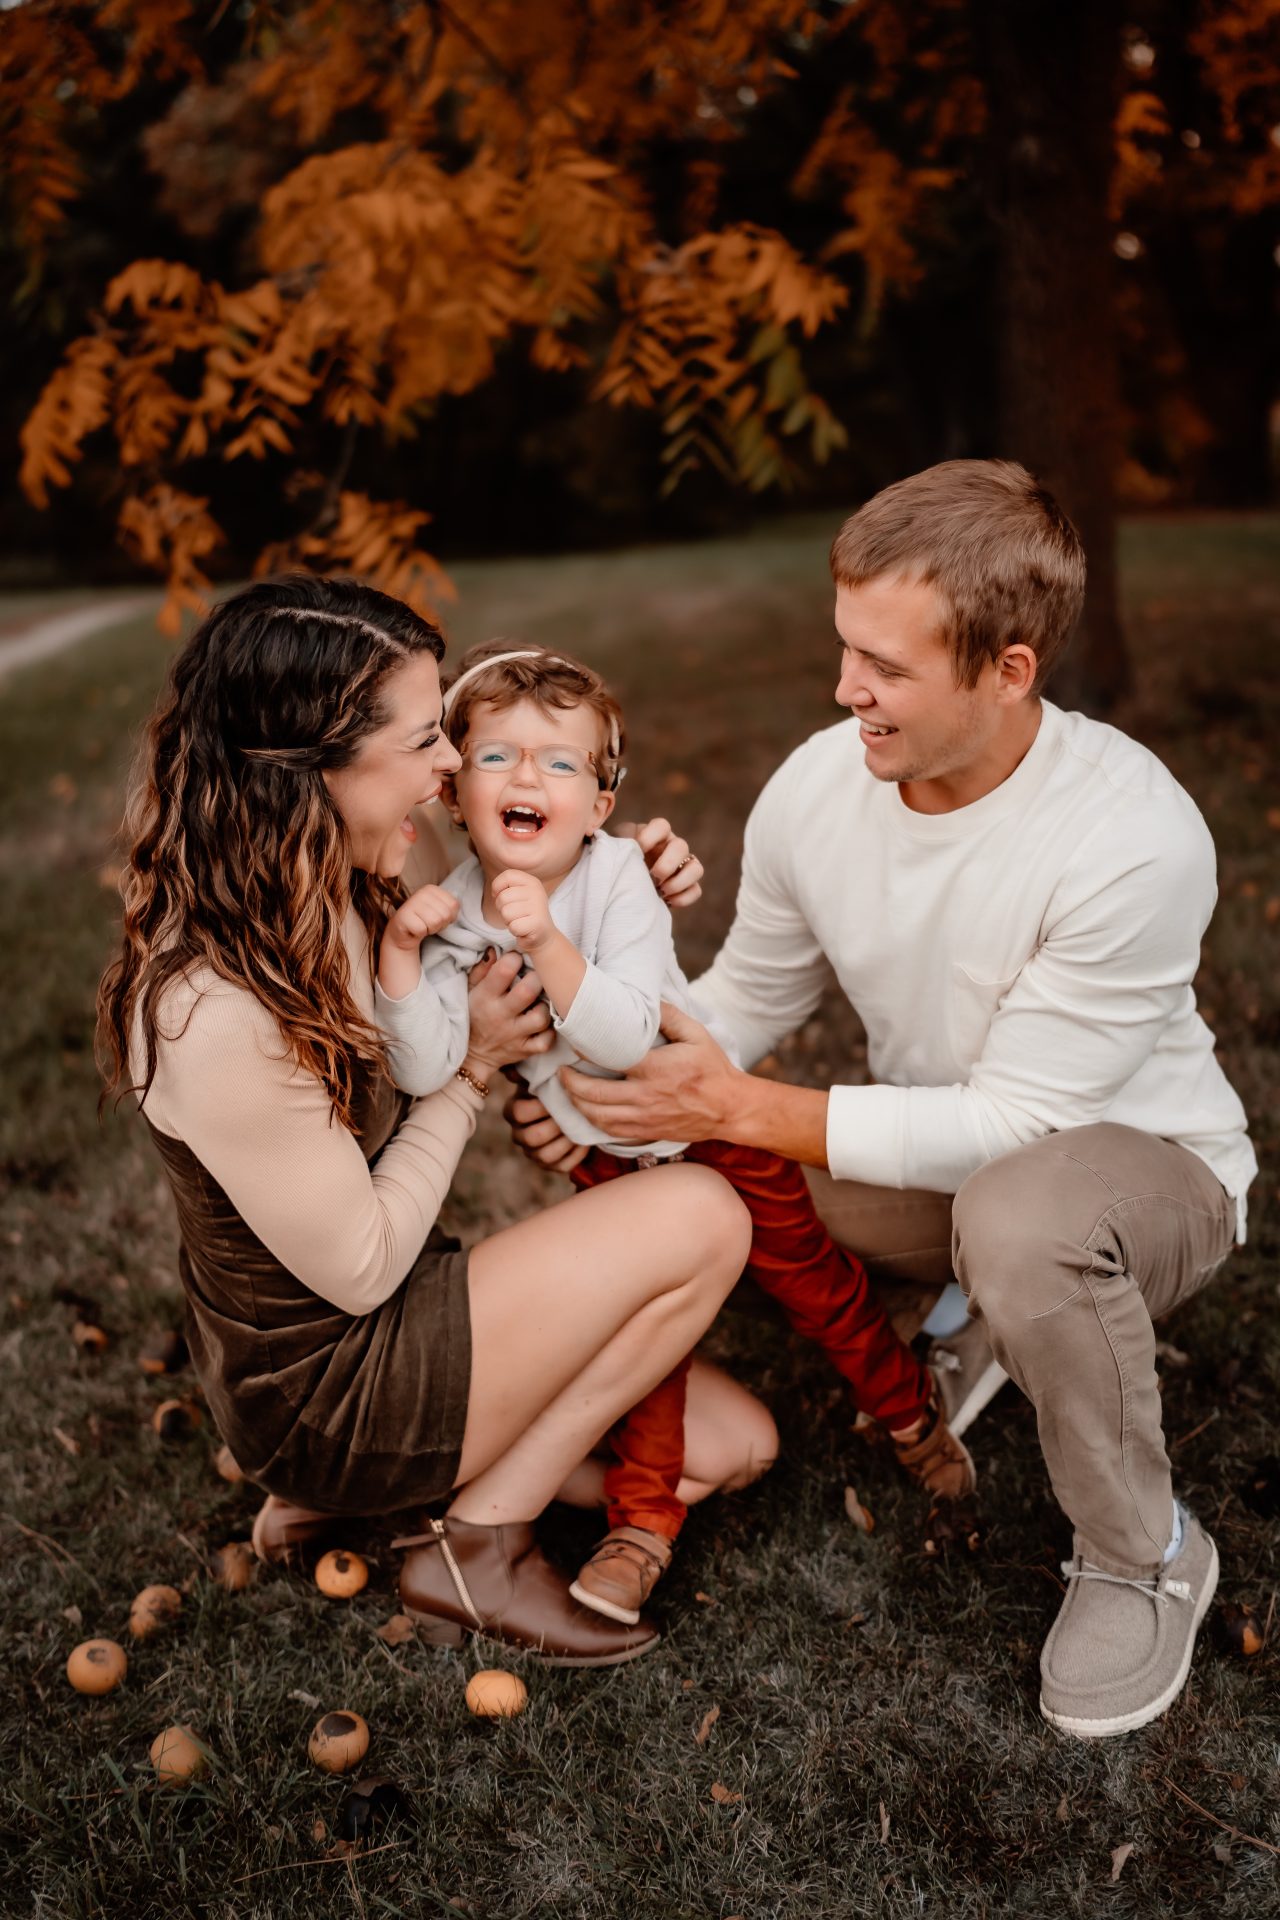 Brandon, Beth and Cooper kneel in grass in front of a colorful fall tree. Beth is an inclusion advocate with a focus on raising a deaf child.